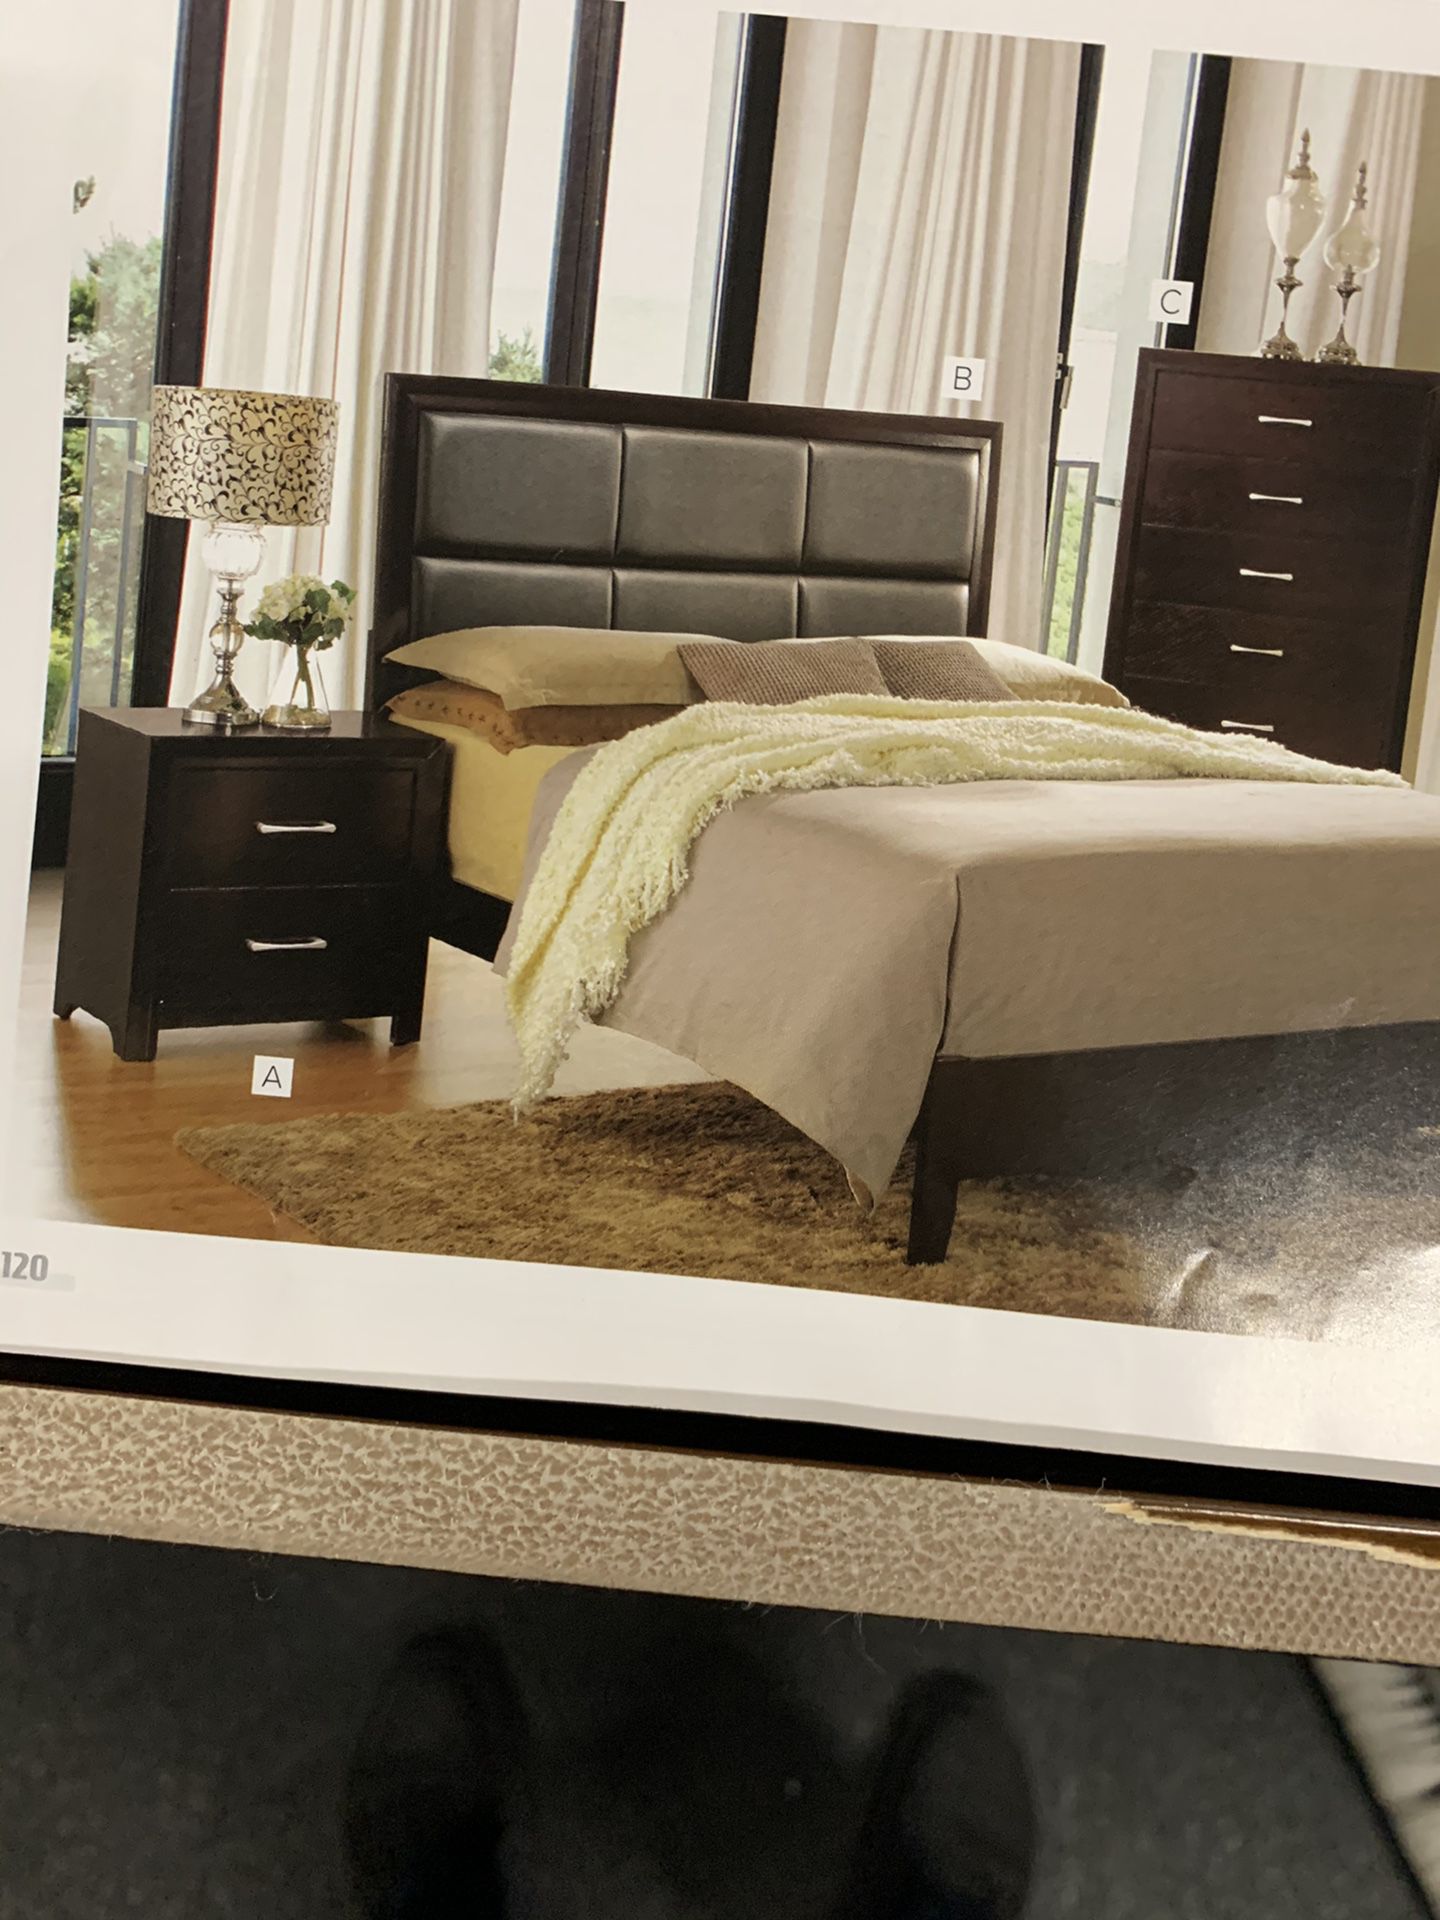 Queen bed room set on Sale (includes queen bed frame, dresser, mirror and 1 congratulations